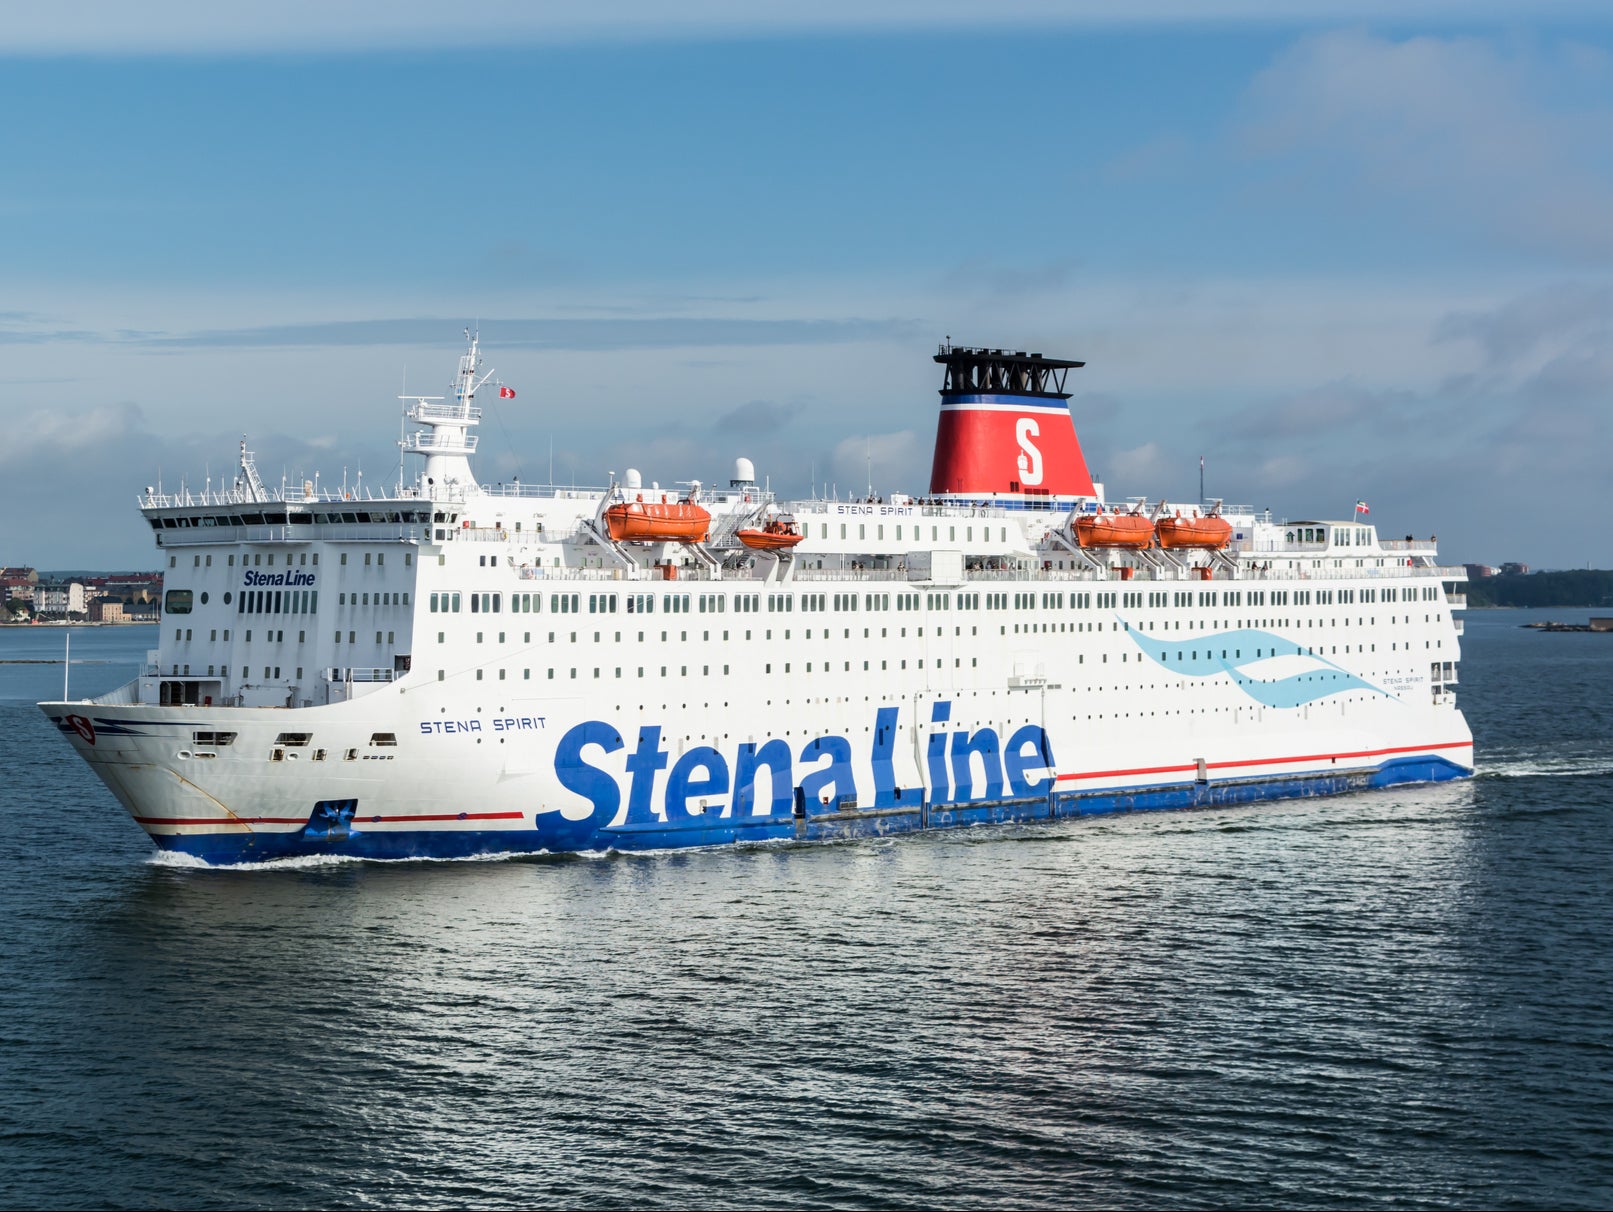 The Stena Line-owned Stena Spirit passenger ferry sailing from Karlskrona, Sweden, to Gdynia, Poland, across the Baltic Sea